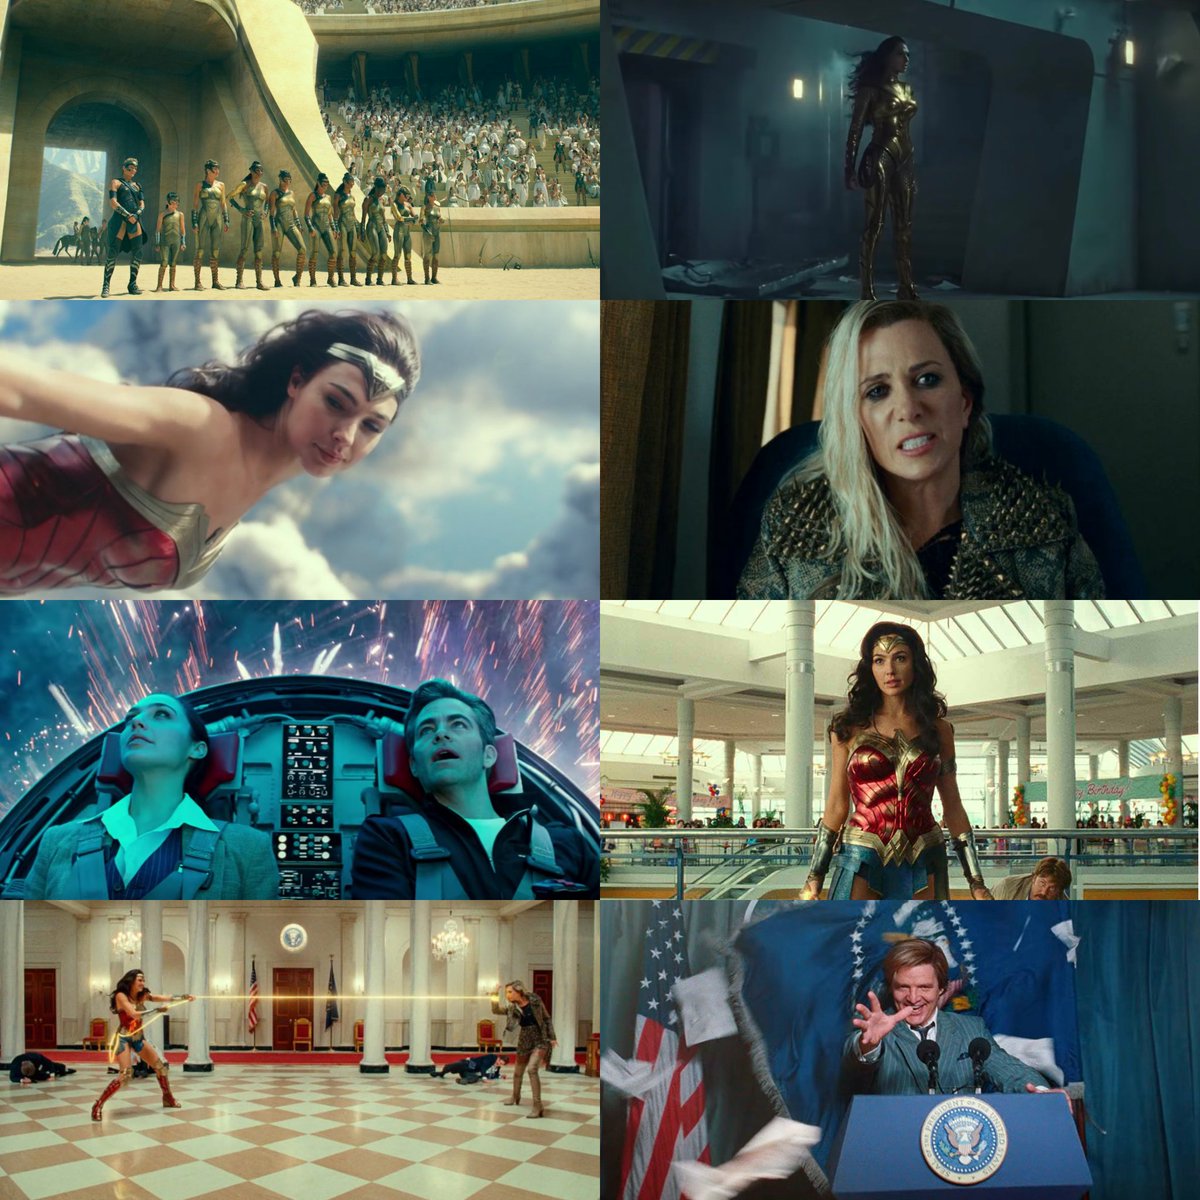 RT @slythwalker_28: Wonder Woman 1984 is one of the most spectacular, emotional and stunning films I've ever seen https://t.co/LwvRgf7urs